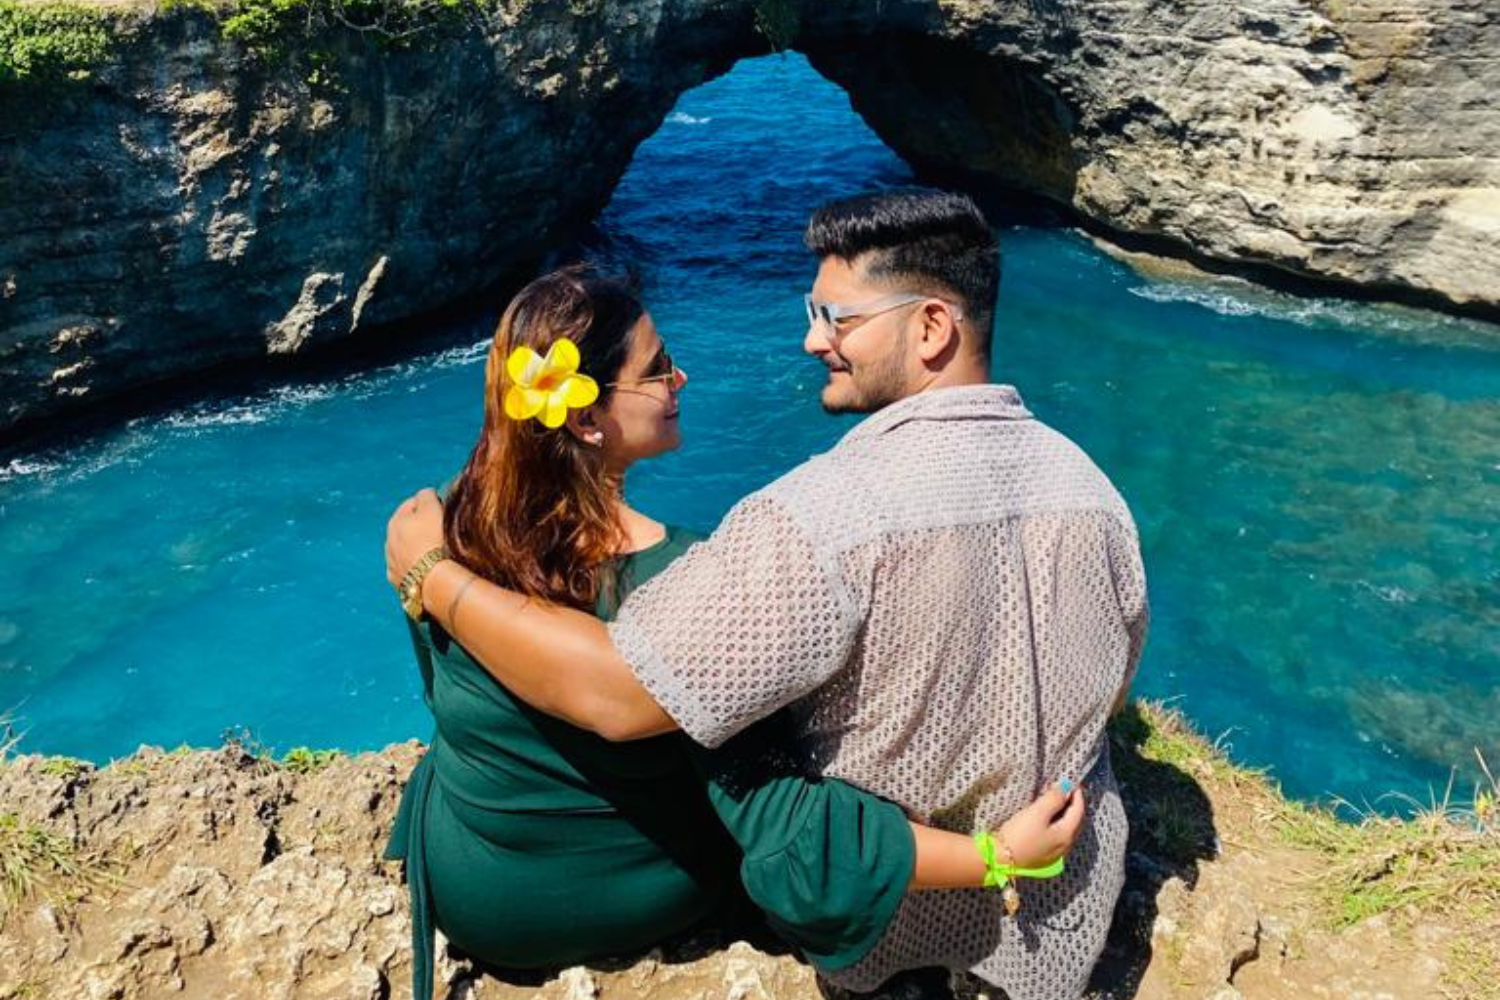 “Lived my ZNMD moment in Bali with my Better half” - Akanksha